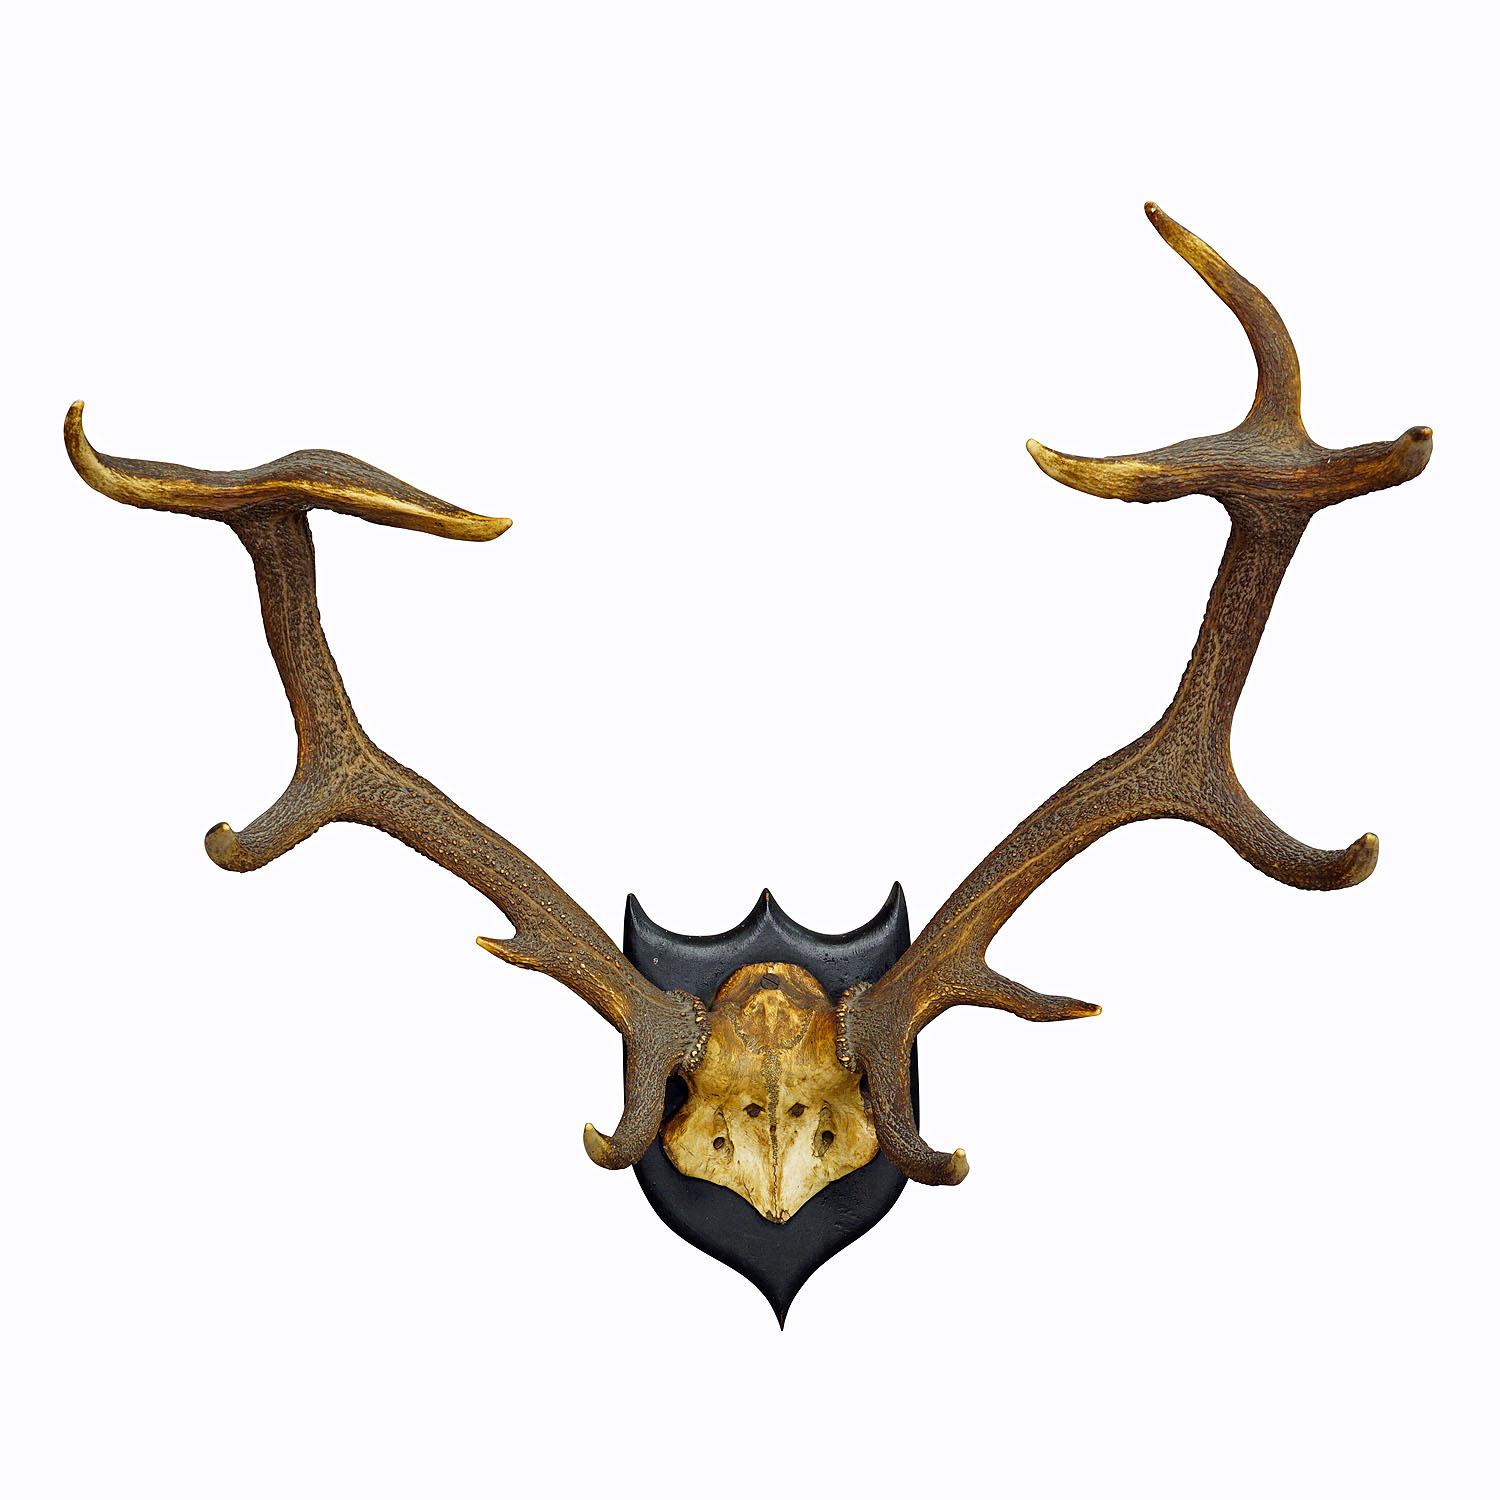 Large Black Forest 12 Pointer Deer Trophy on Wooden Plaque

An antique uneven 12 pointer deer (Cervus elaphus) trophy from the Black Forest. The trophy was shot around 1900. The large antlers are mounted on a wooden wall plaque with black